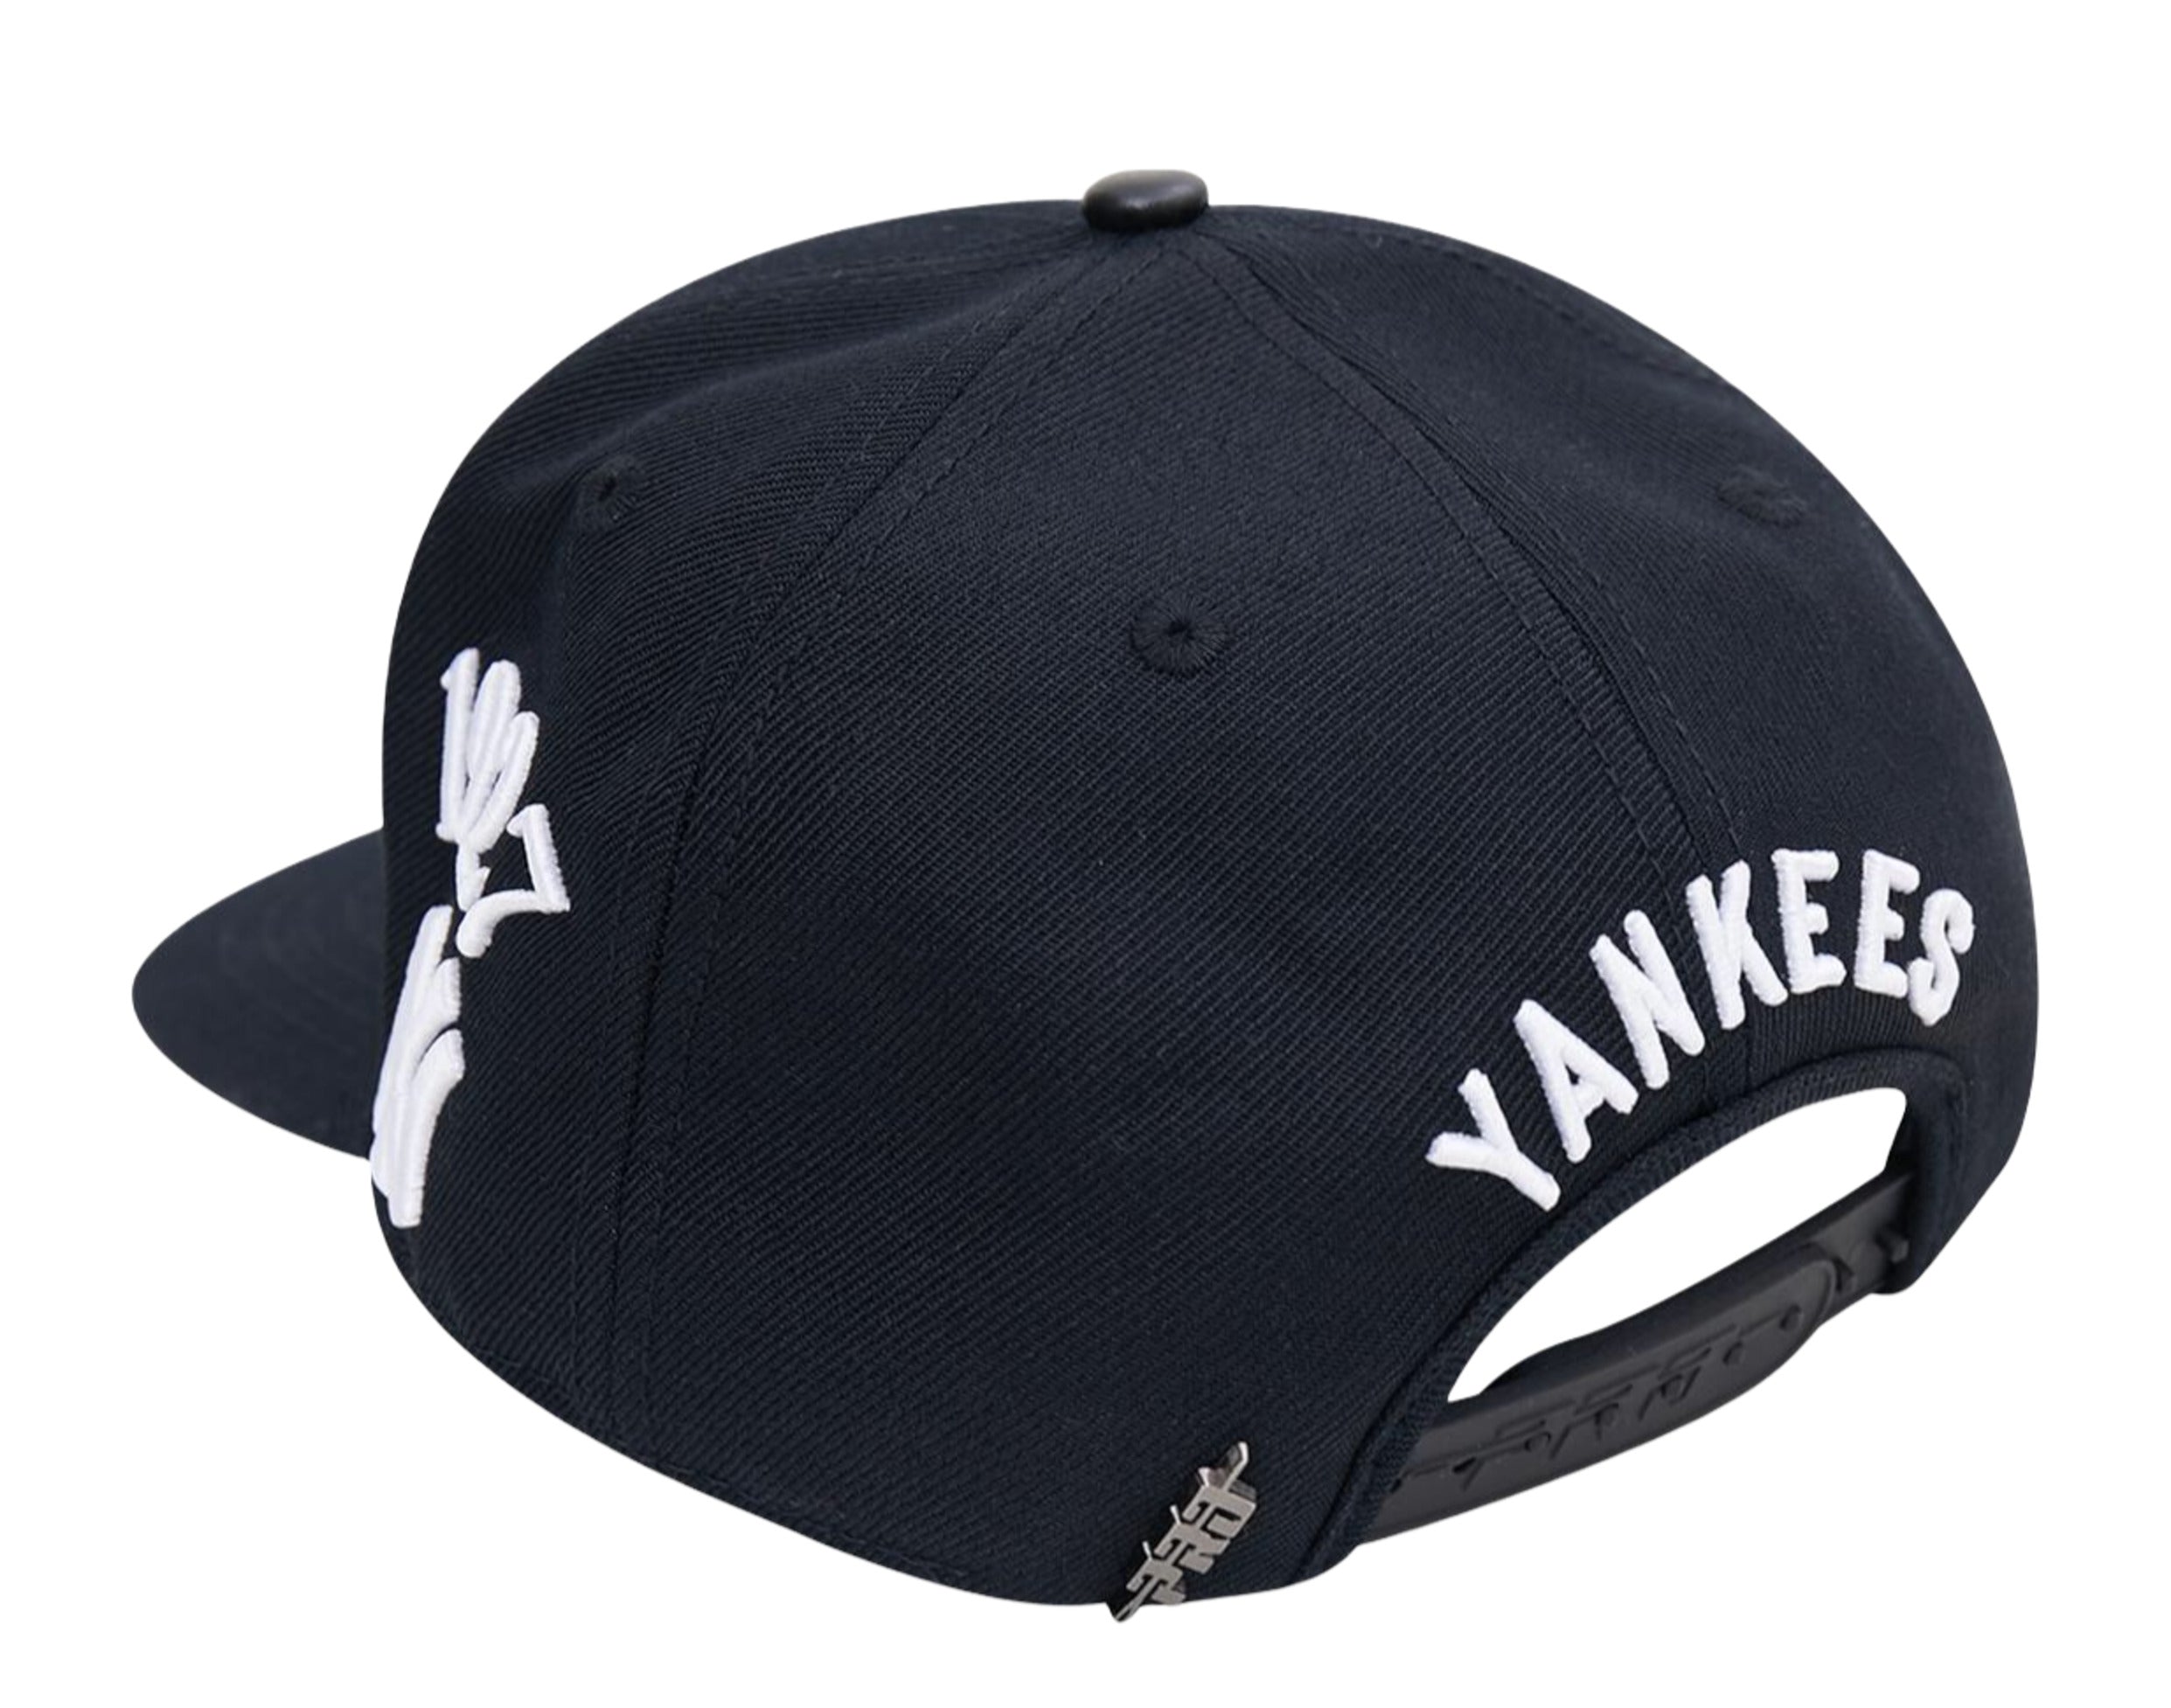 New York Yankees MURDERERS ROW Black Fitted Hat by New Era